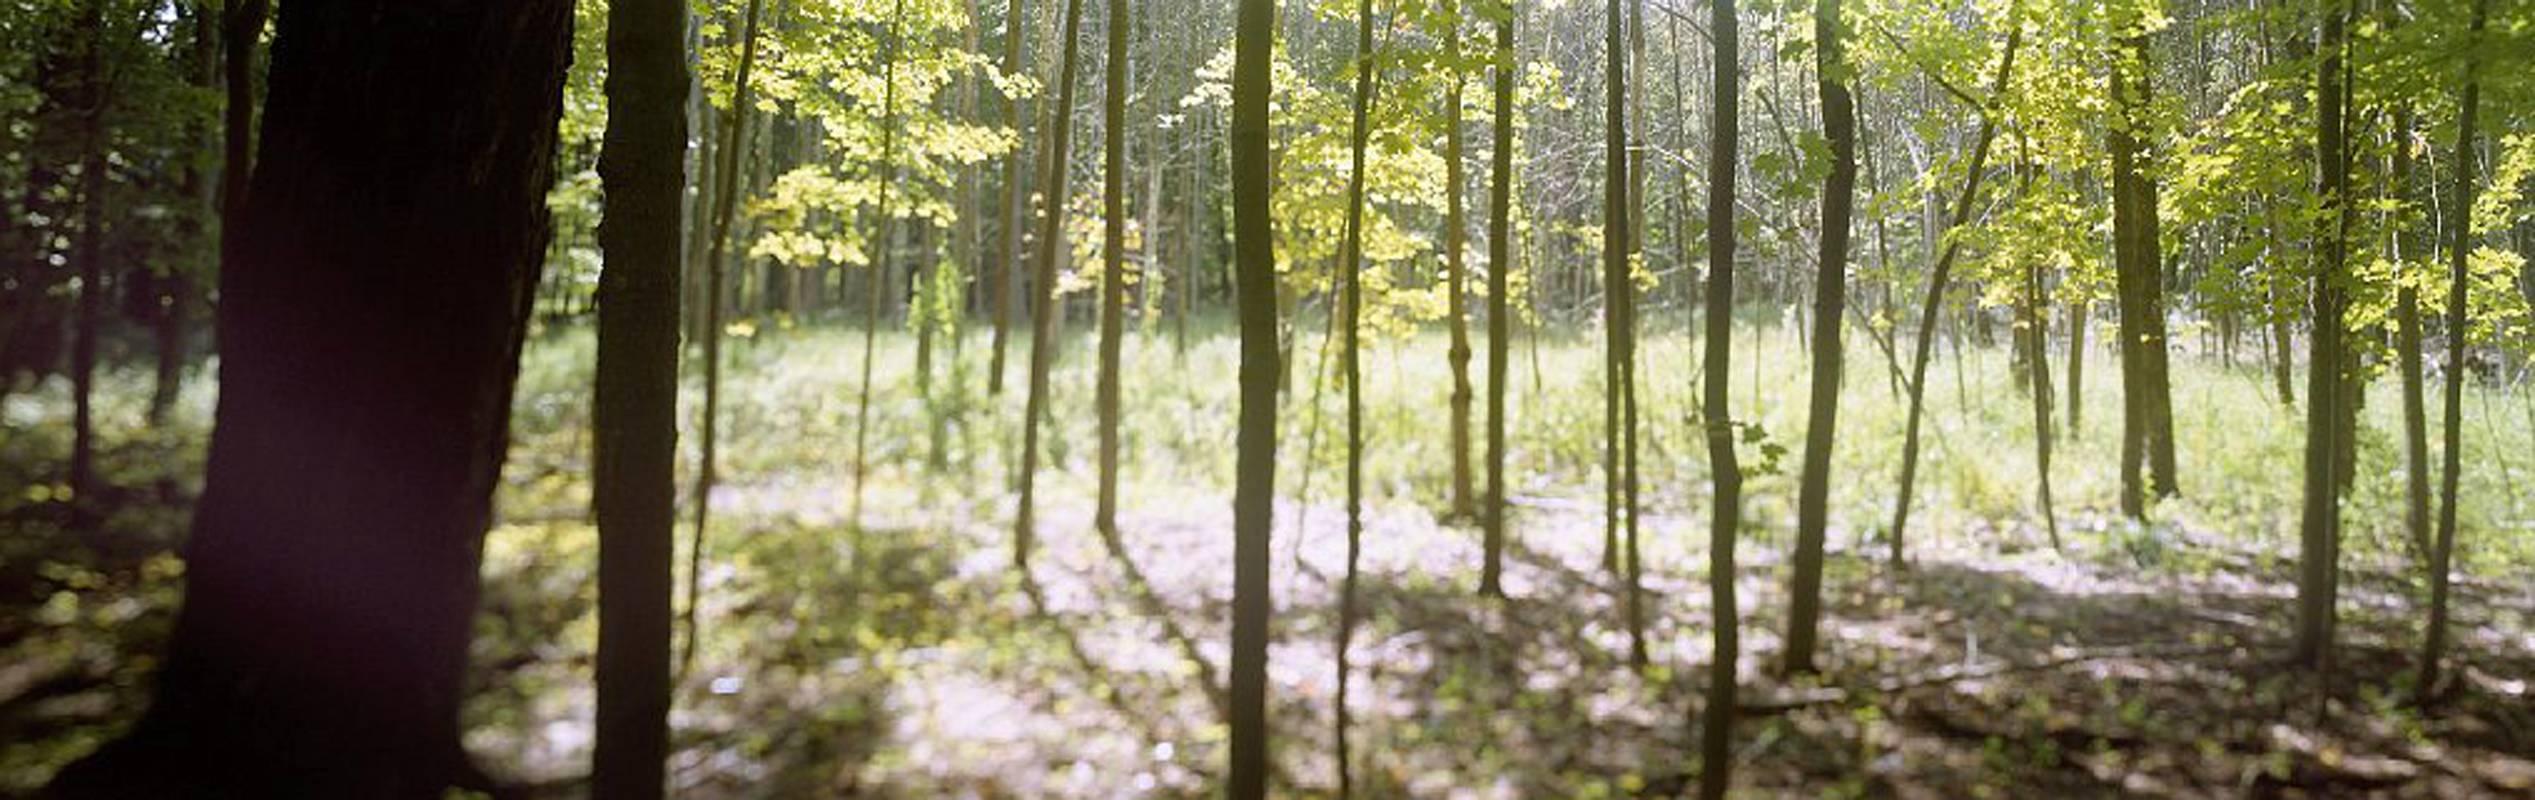 This evocative photograph of a sunlit grove is from a series of landscapes by Thom Lussier. Each horizontal photograph depicts a vista whose focus has been blurred or manipulated to create a dream-like space. The print is mounted on aluminium with a